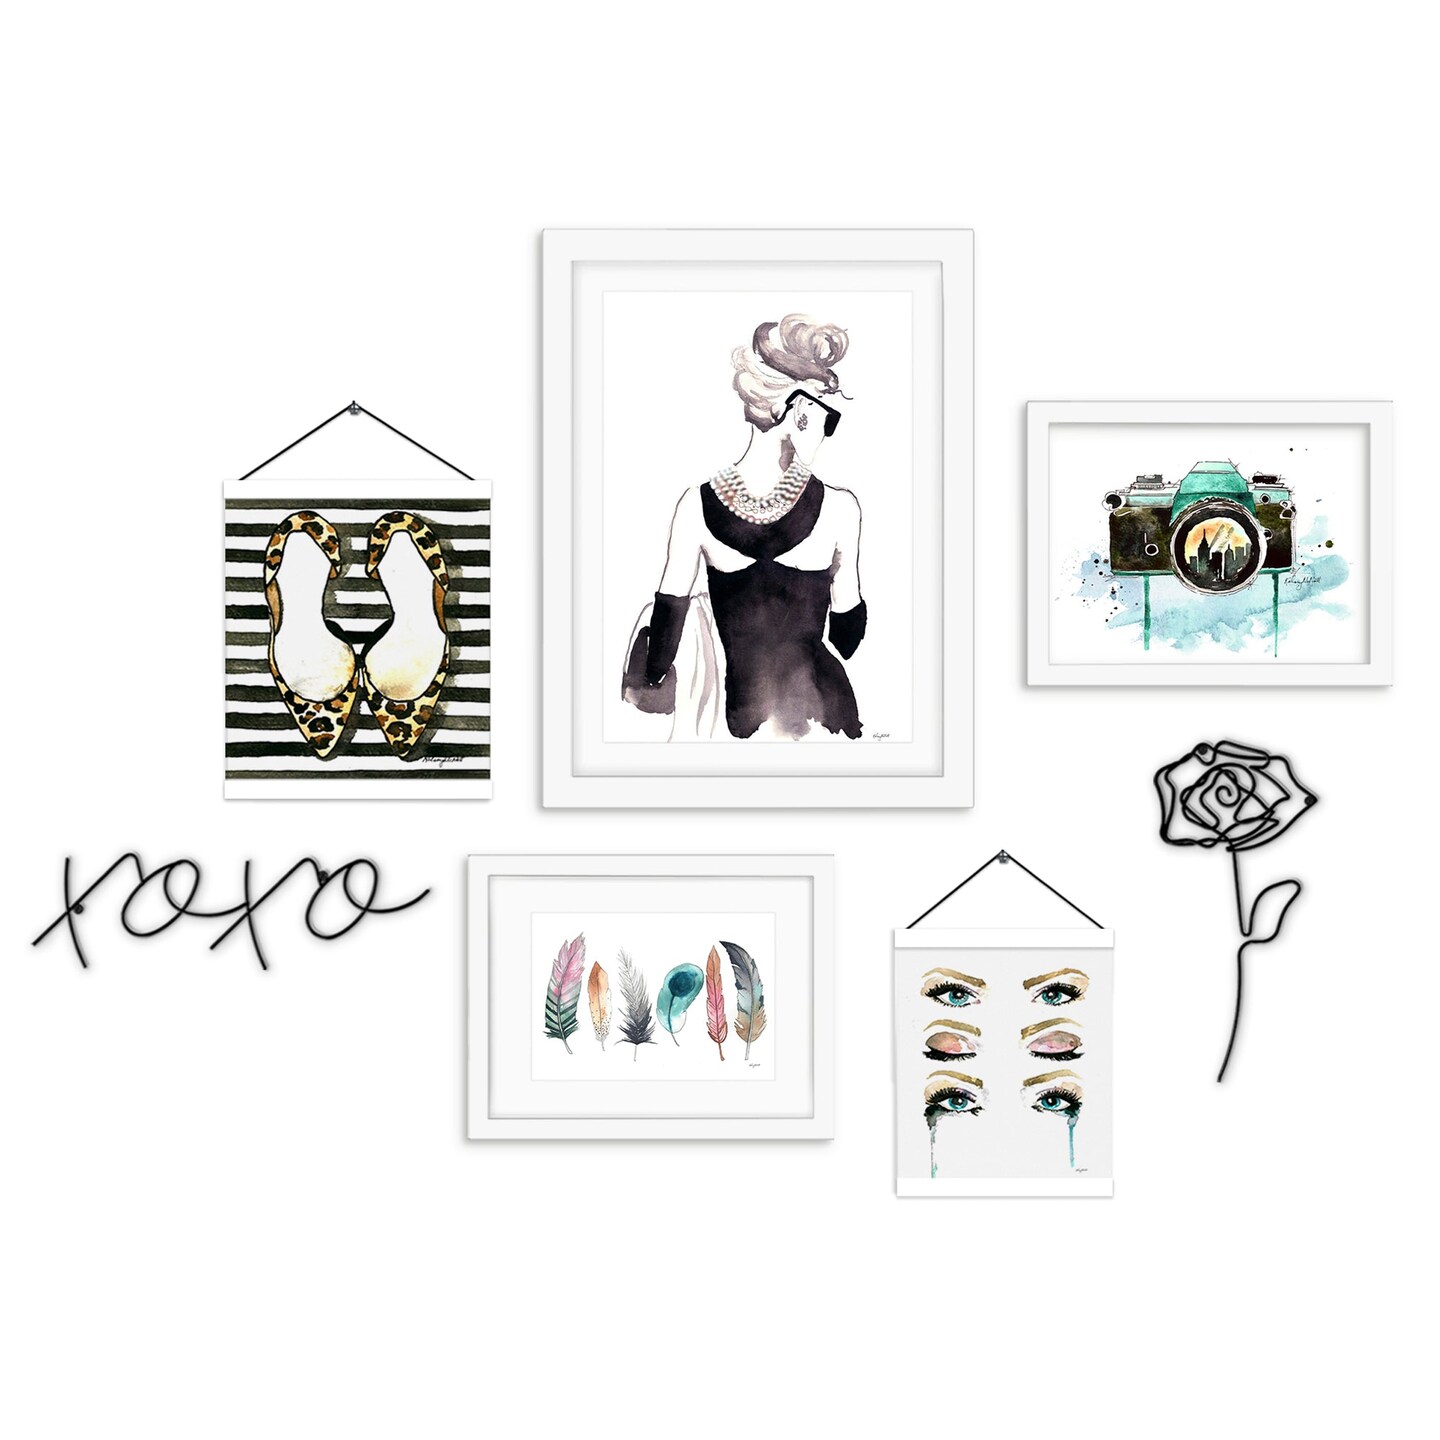 Framed Multimedia Gallery Wall Art Set - Optics of Fashion and Feathers